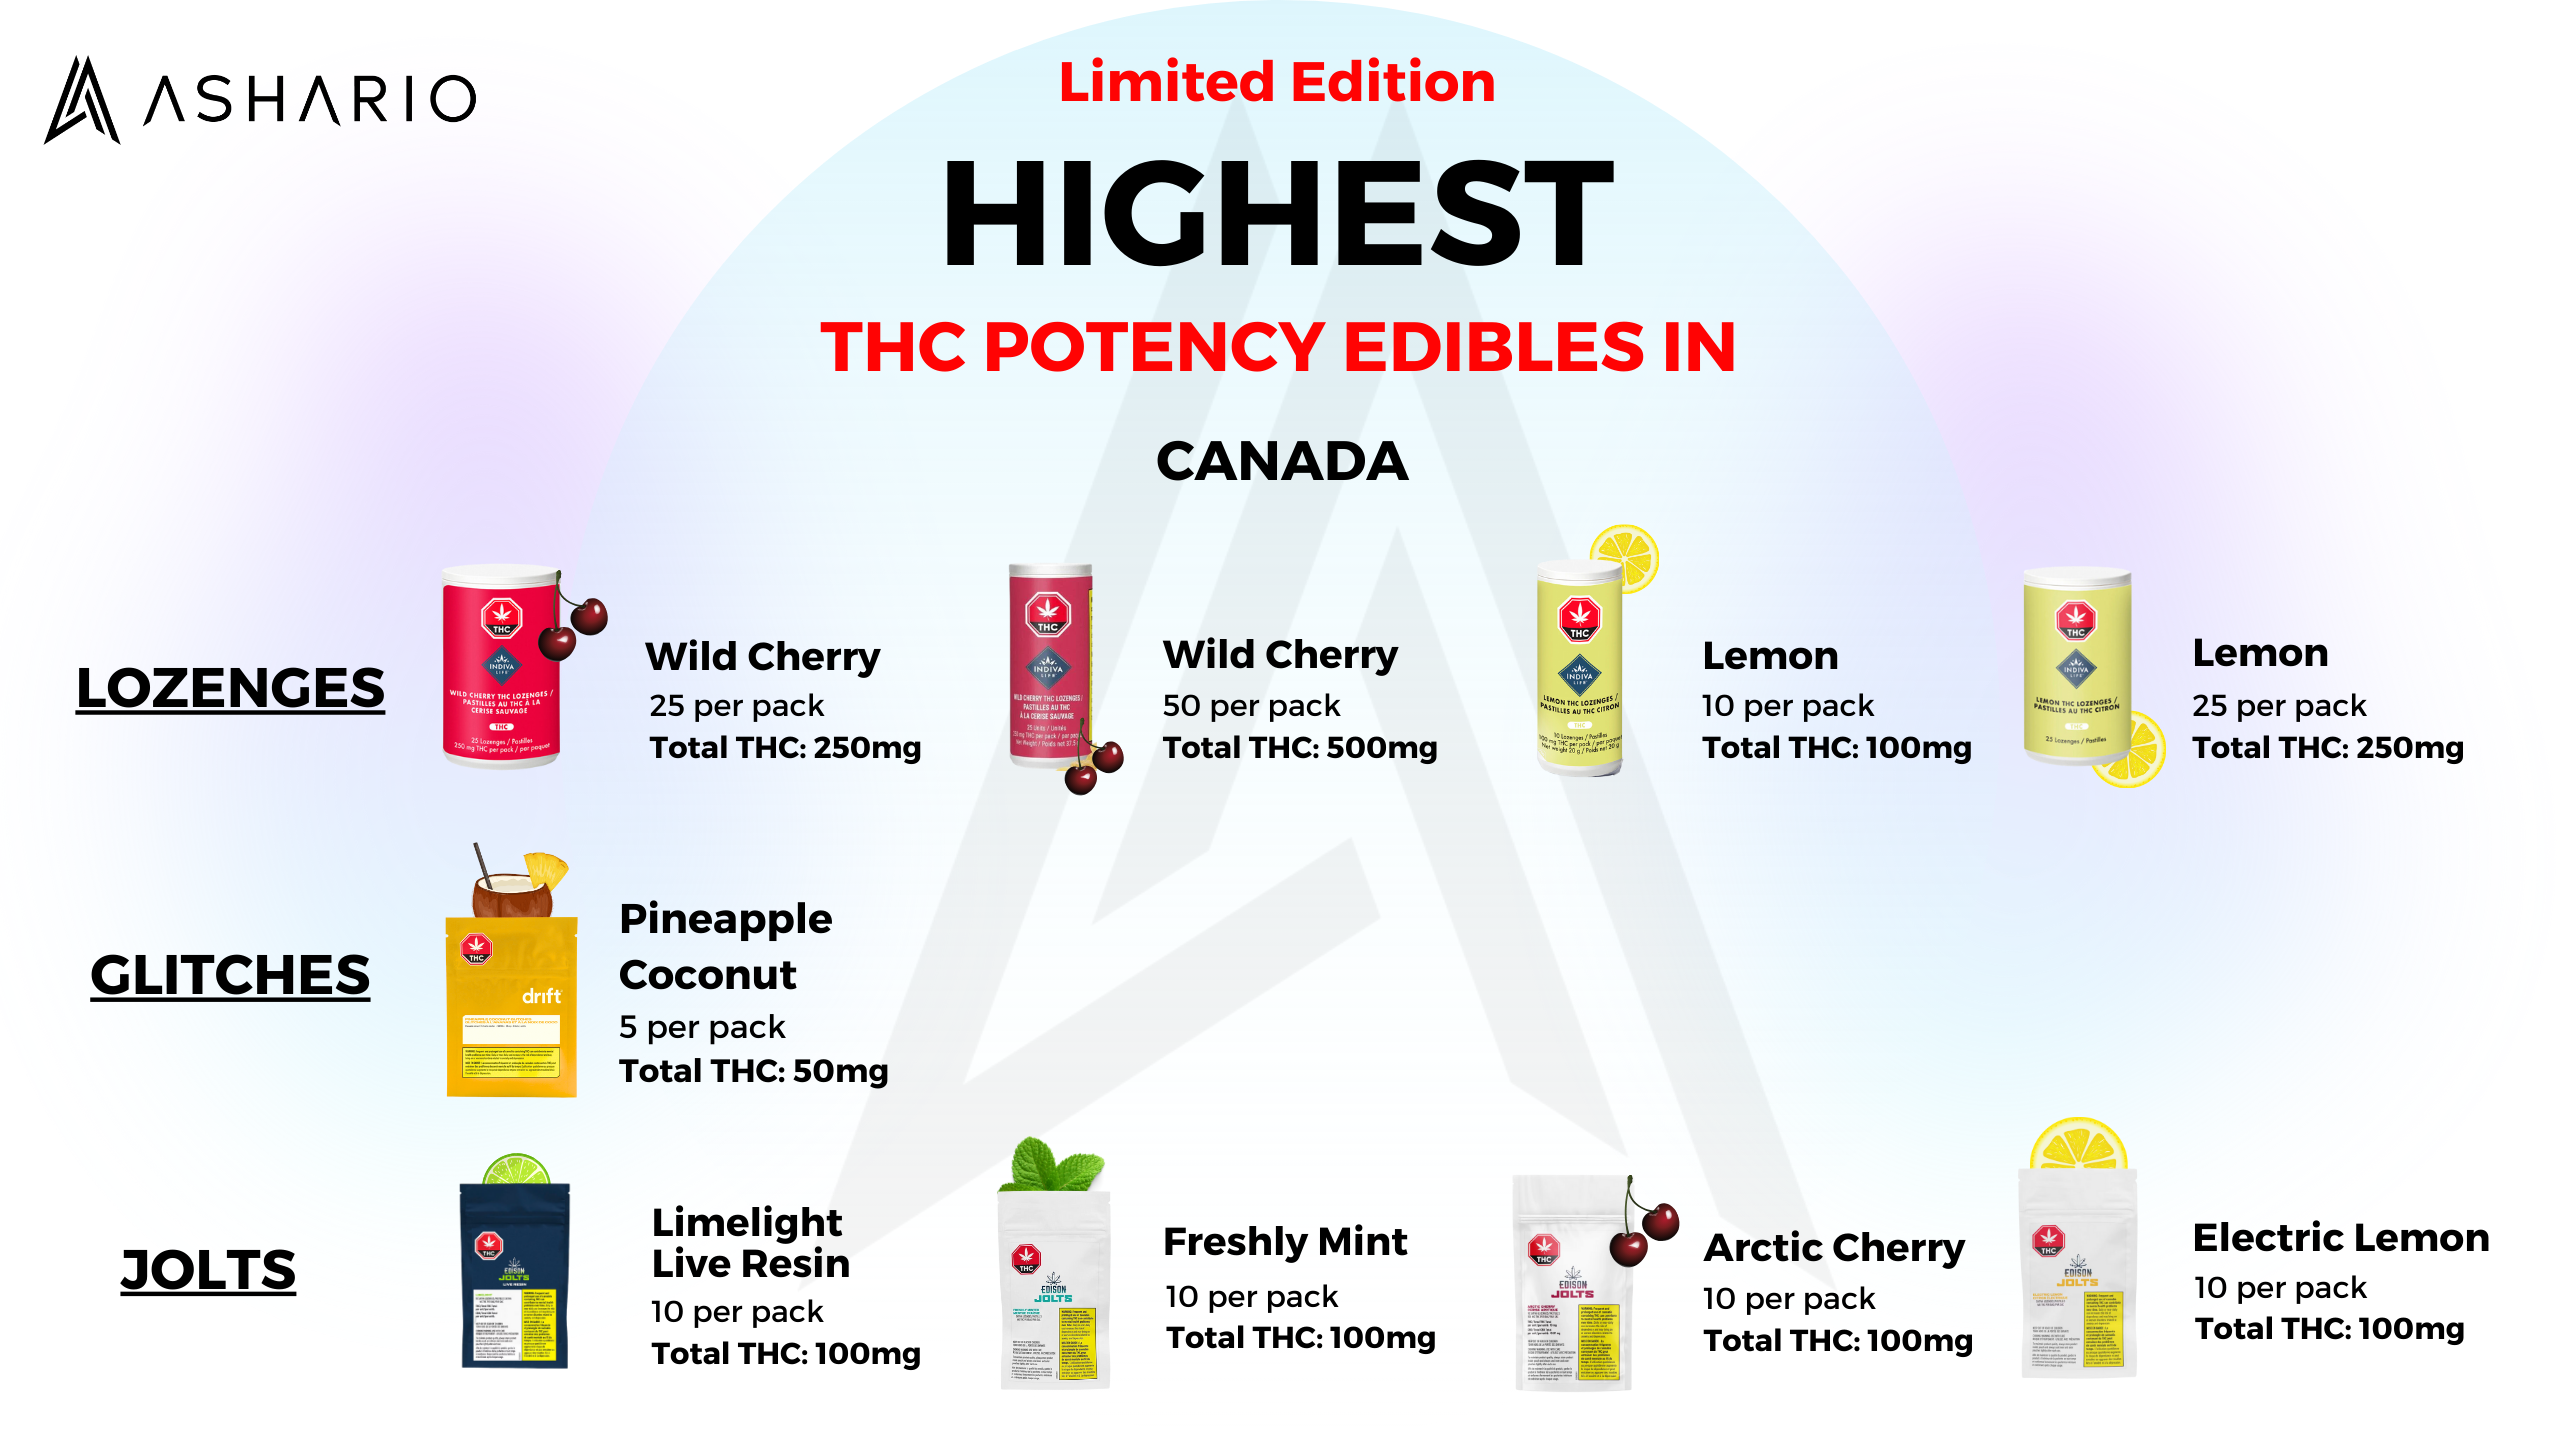 Uncover the pinnacle of potency with Ashario Cannabis and explore the highest mg edible legal in Canada. 